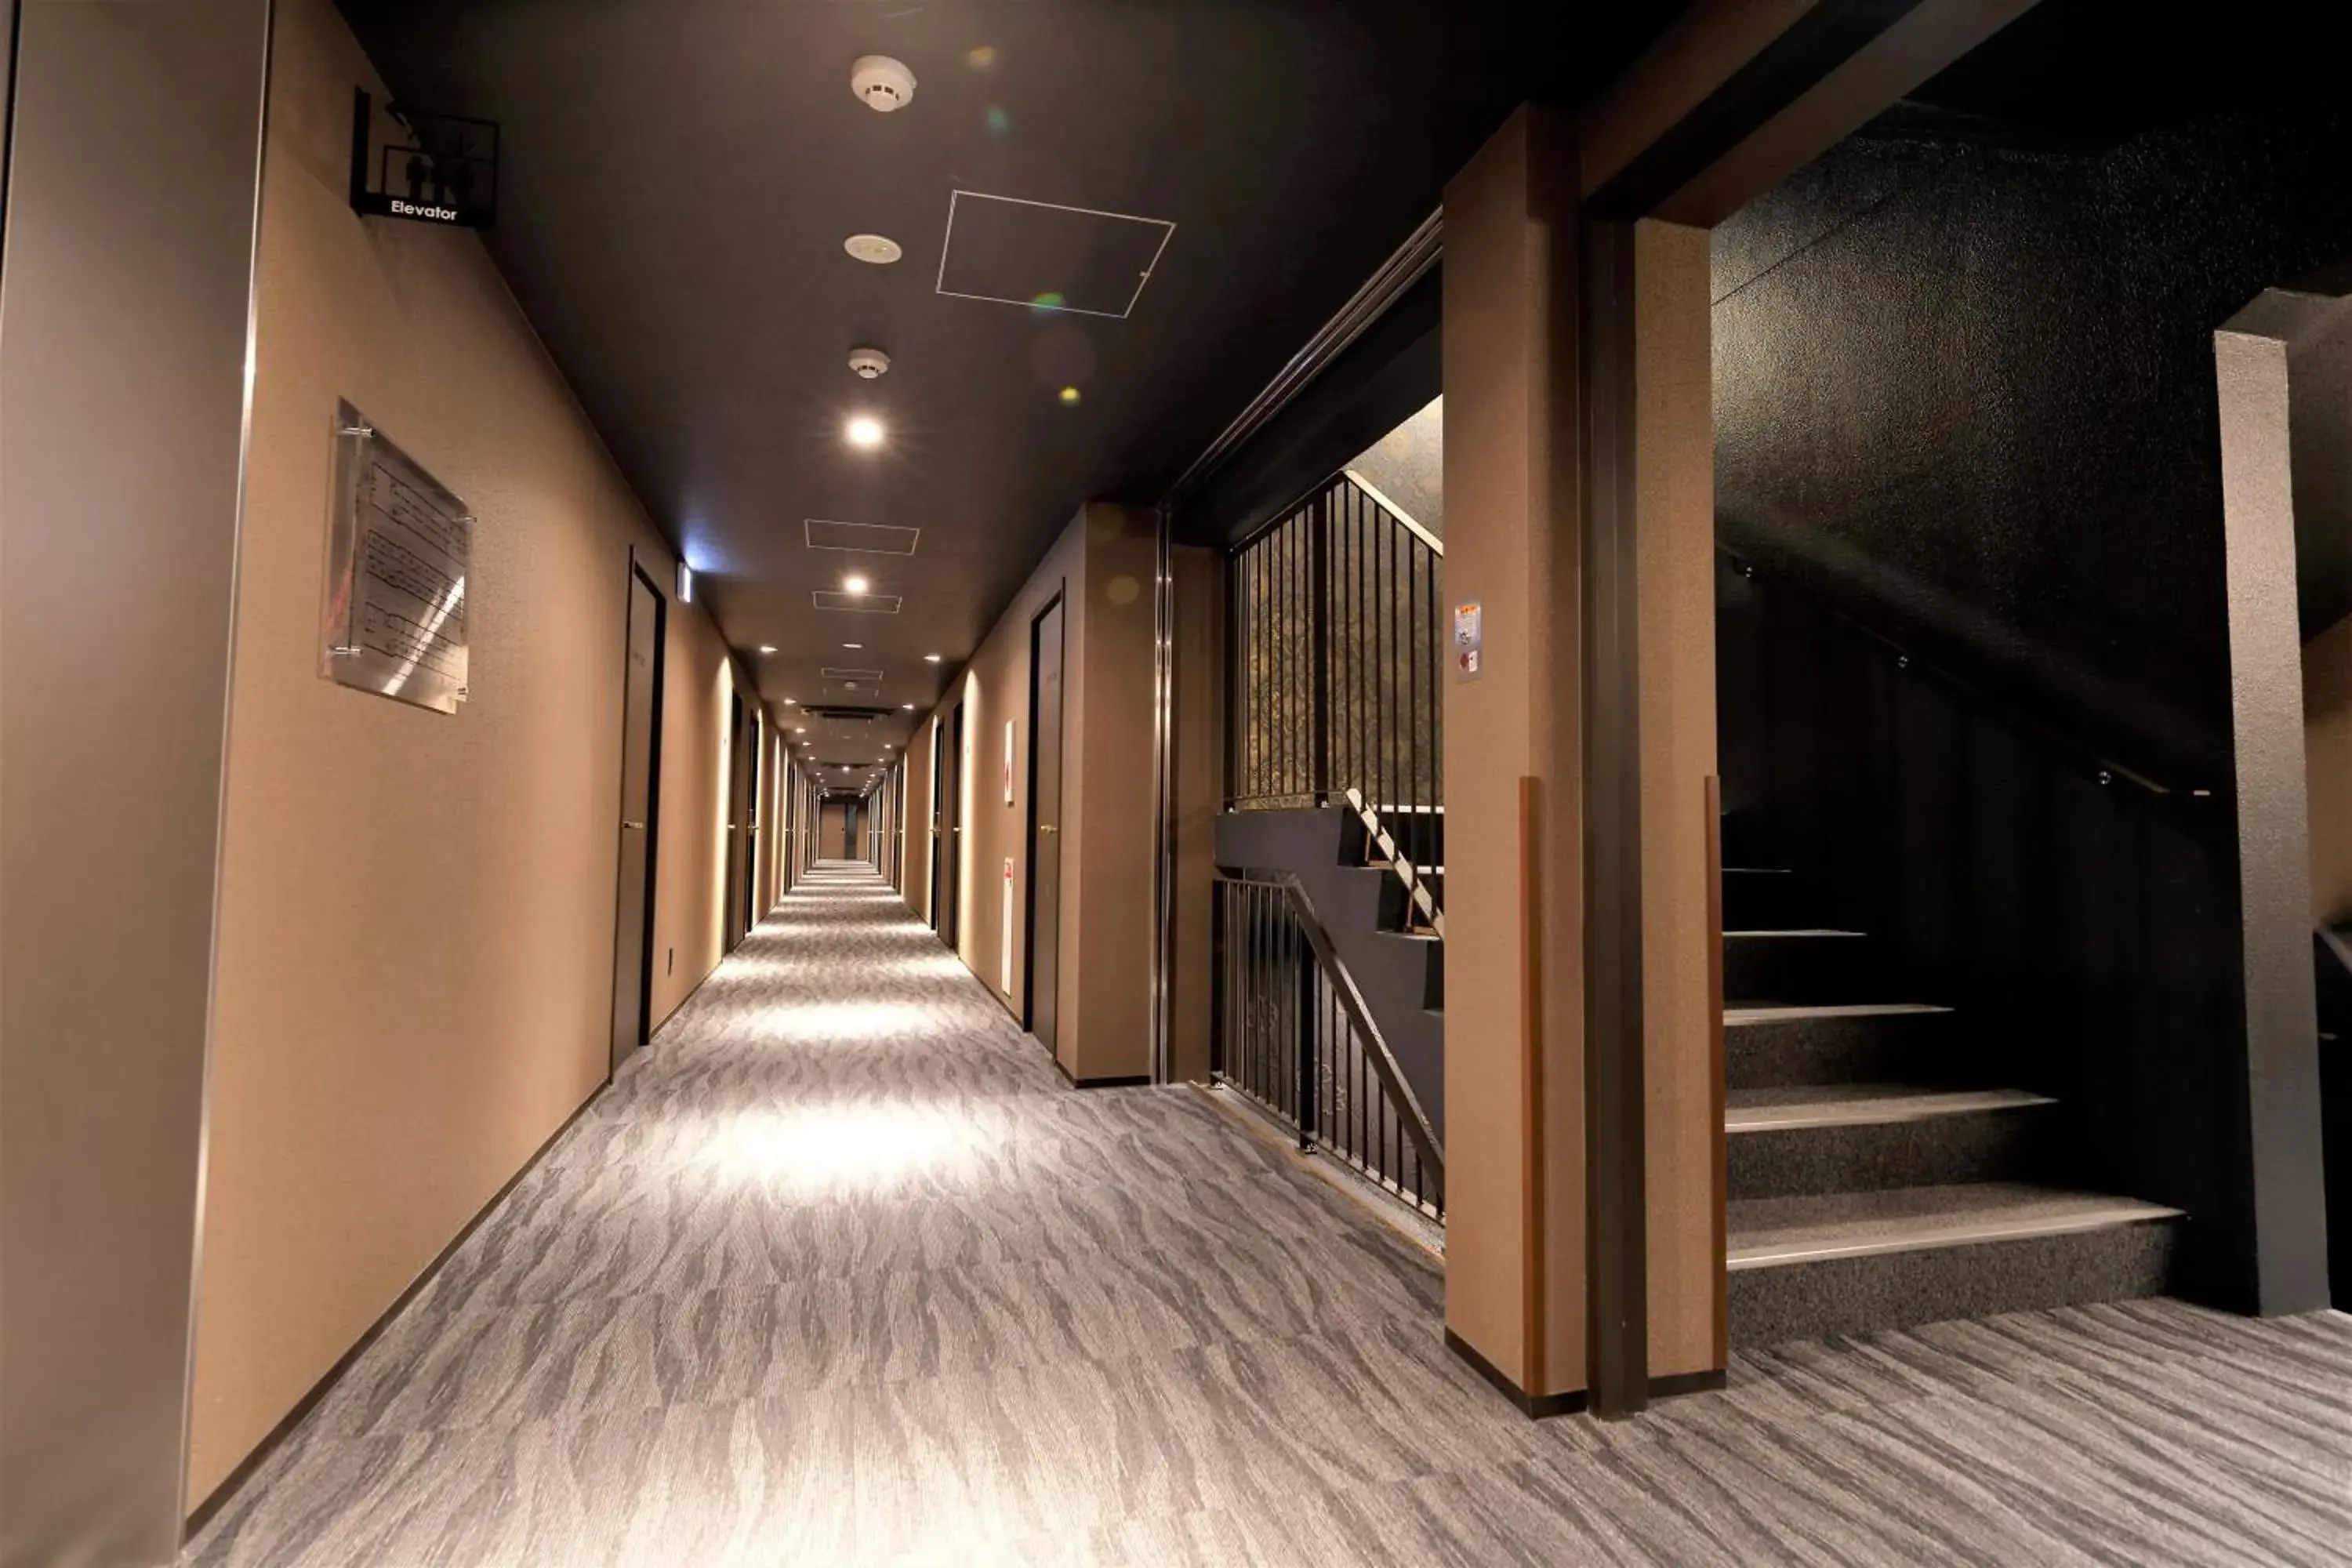 Area and facilities in Act Hotel Roppongi